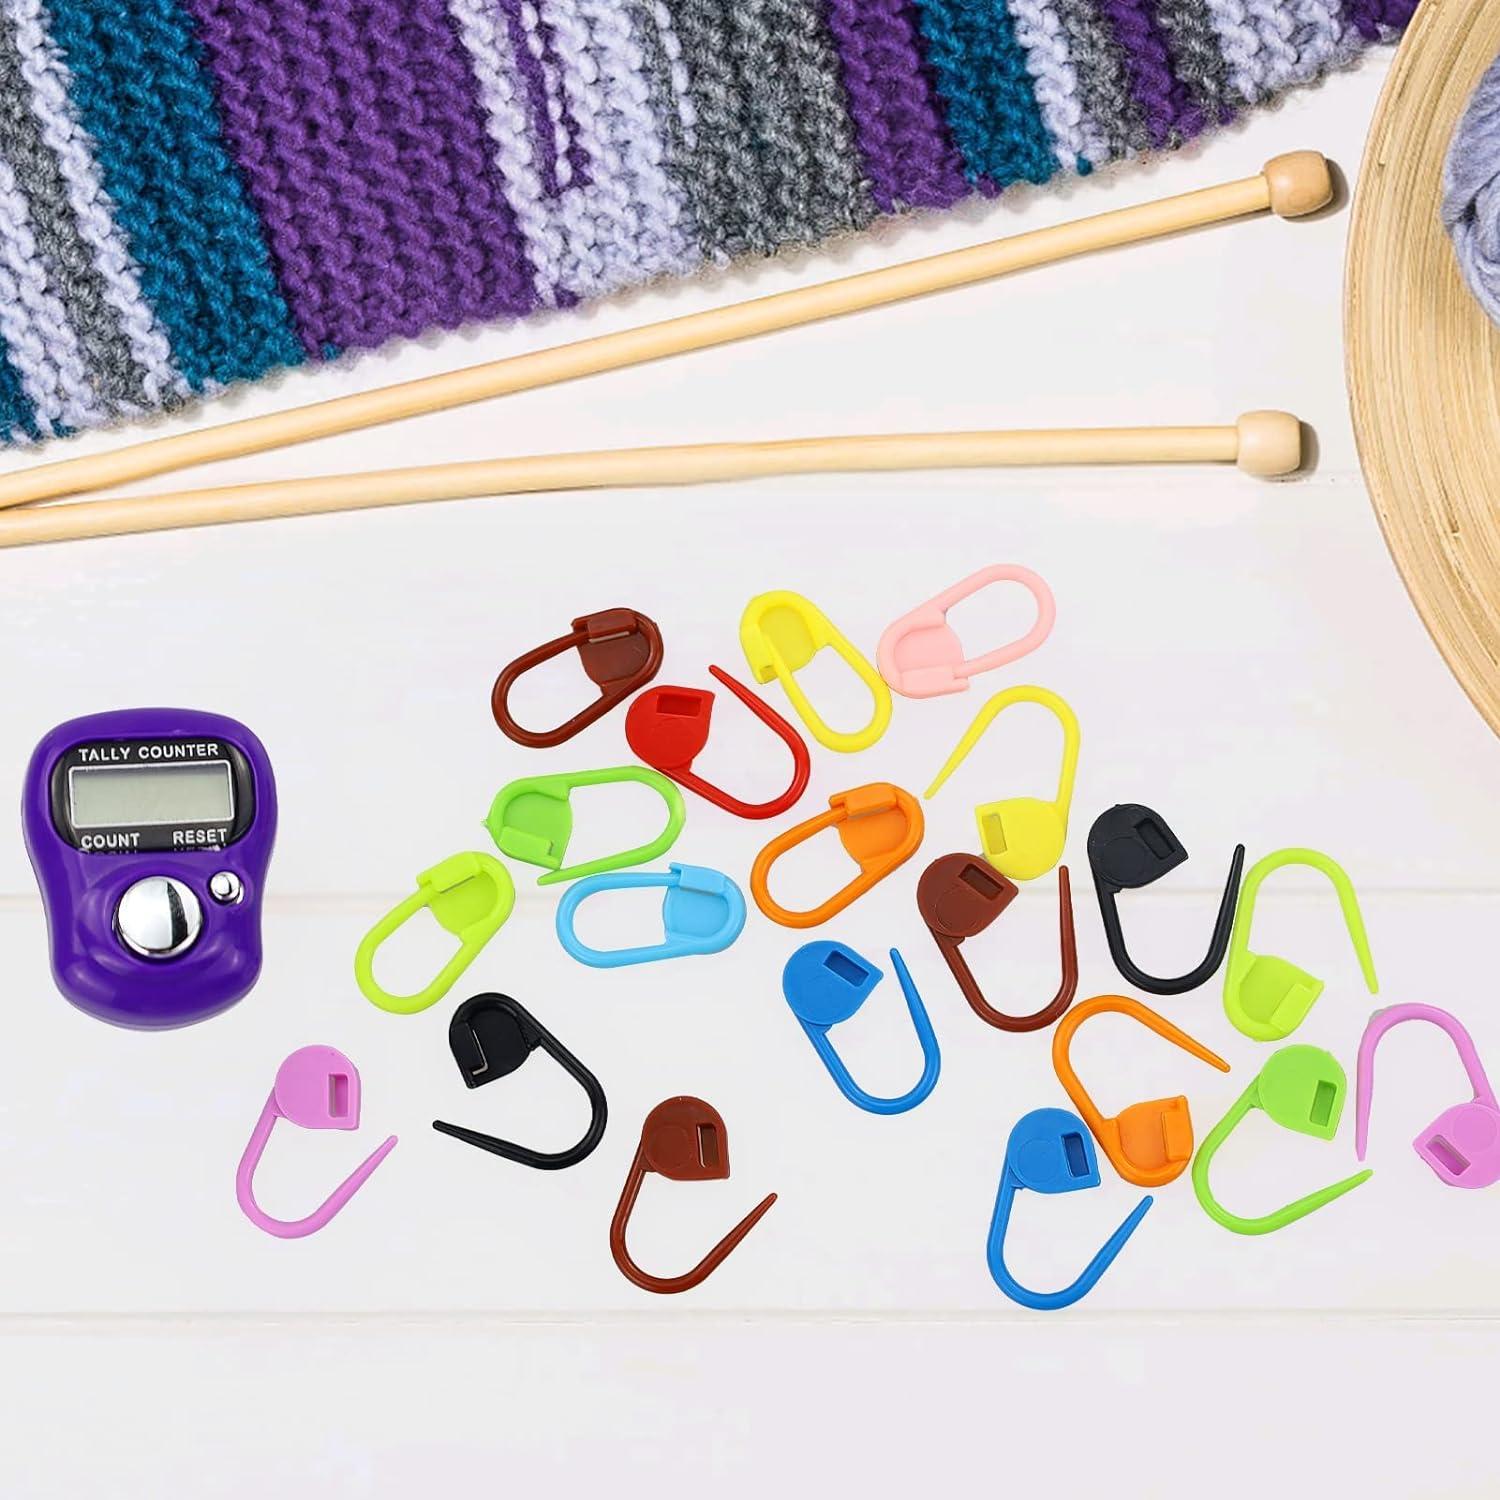 Row Counters Stitch Counters Crochet Knitting 2 Sizes of Sets Purple Stitch  Markers Count Keeper Flos Crafty Crochet 